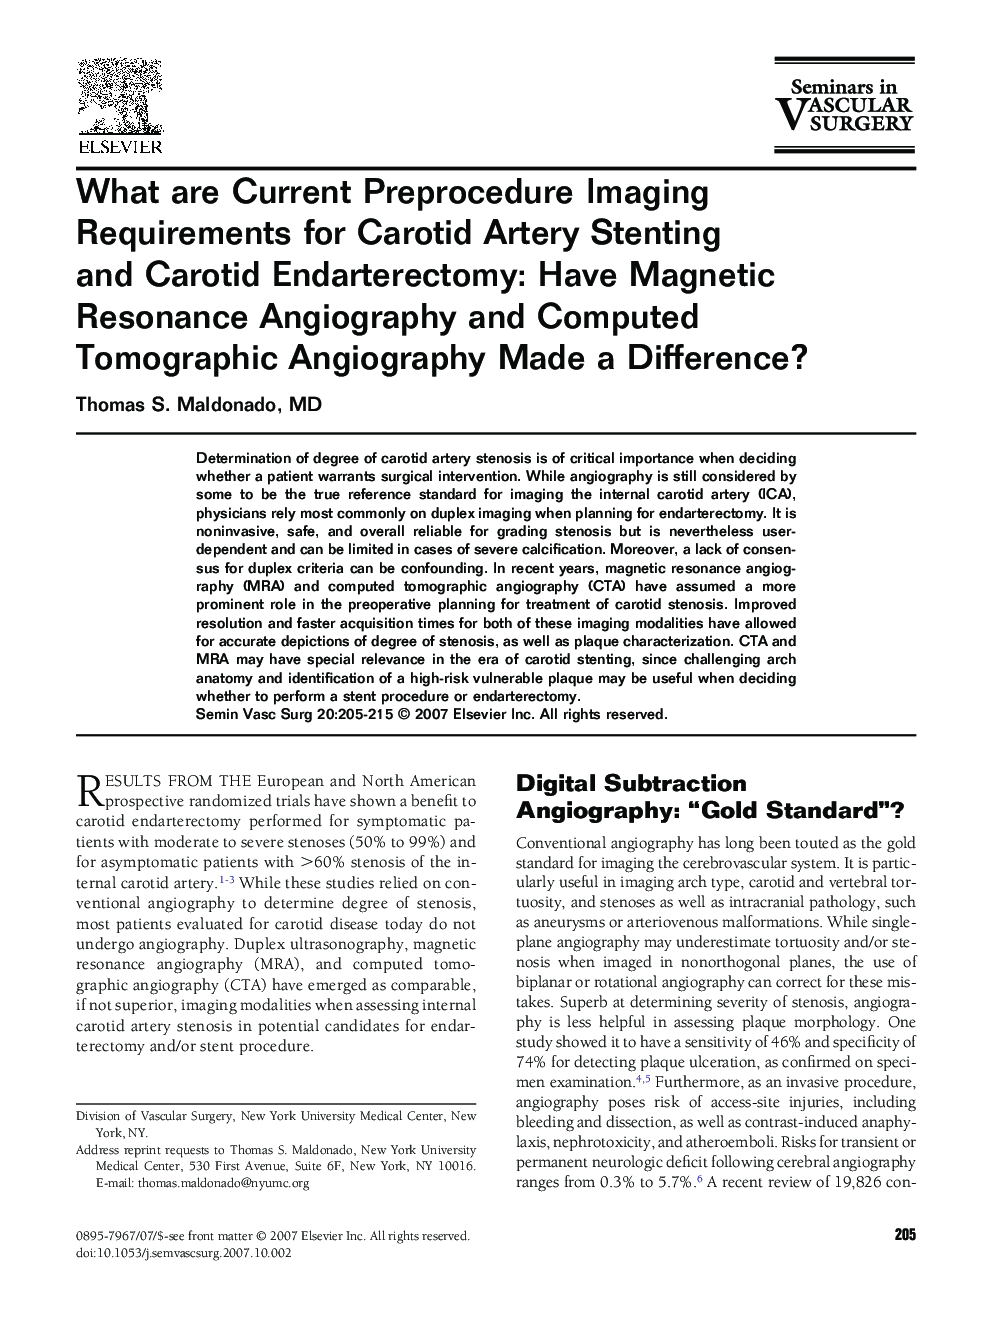 What are Current Preprocedure Imaging Requirements for Carotid Artery Stenting and Carotid Endarterectomy: Have Magnetic Resonance Angiography and Computed Tomographic Angiography Made a Difference?